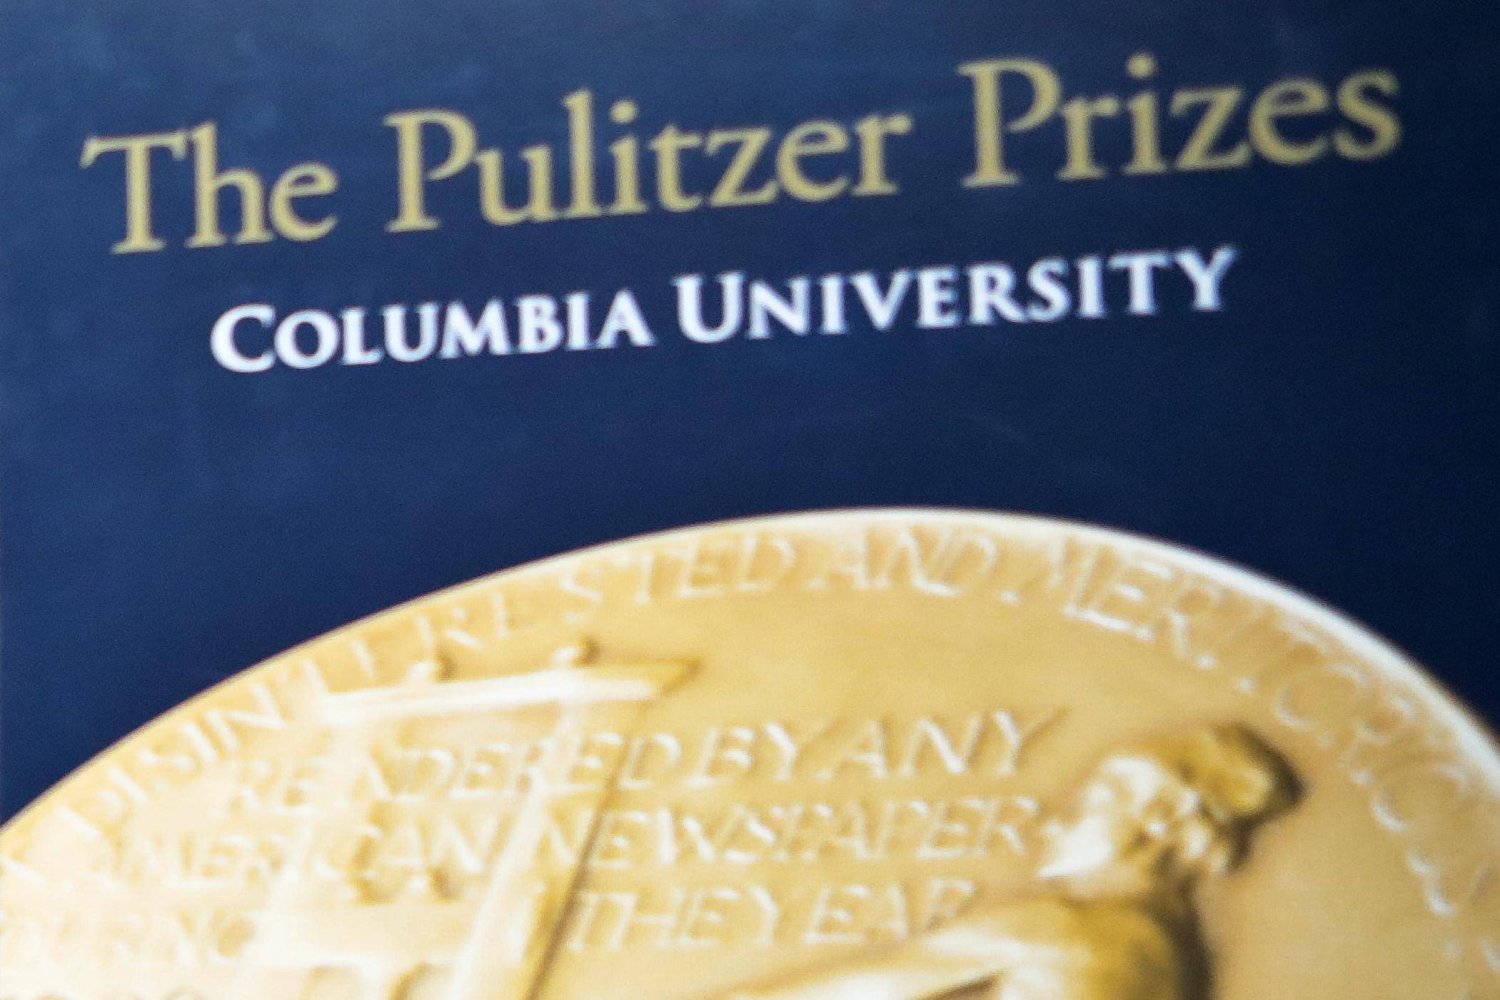 File- Signage for The Pulitzer Prizes appear at Columbia University, May 28, 2019, in New York. (AP Photo/Bebto Matthews, File)

